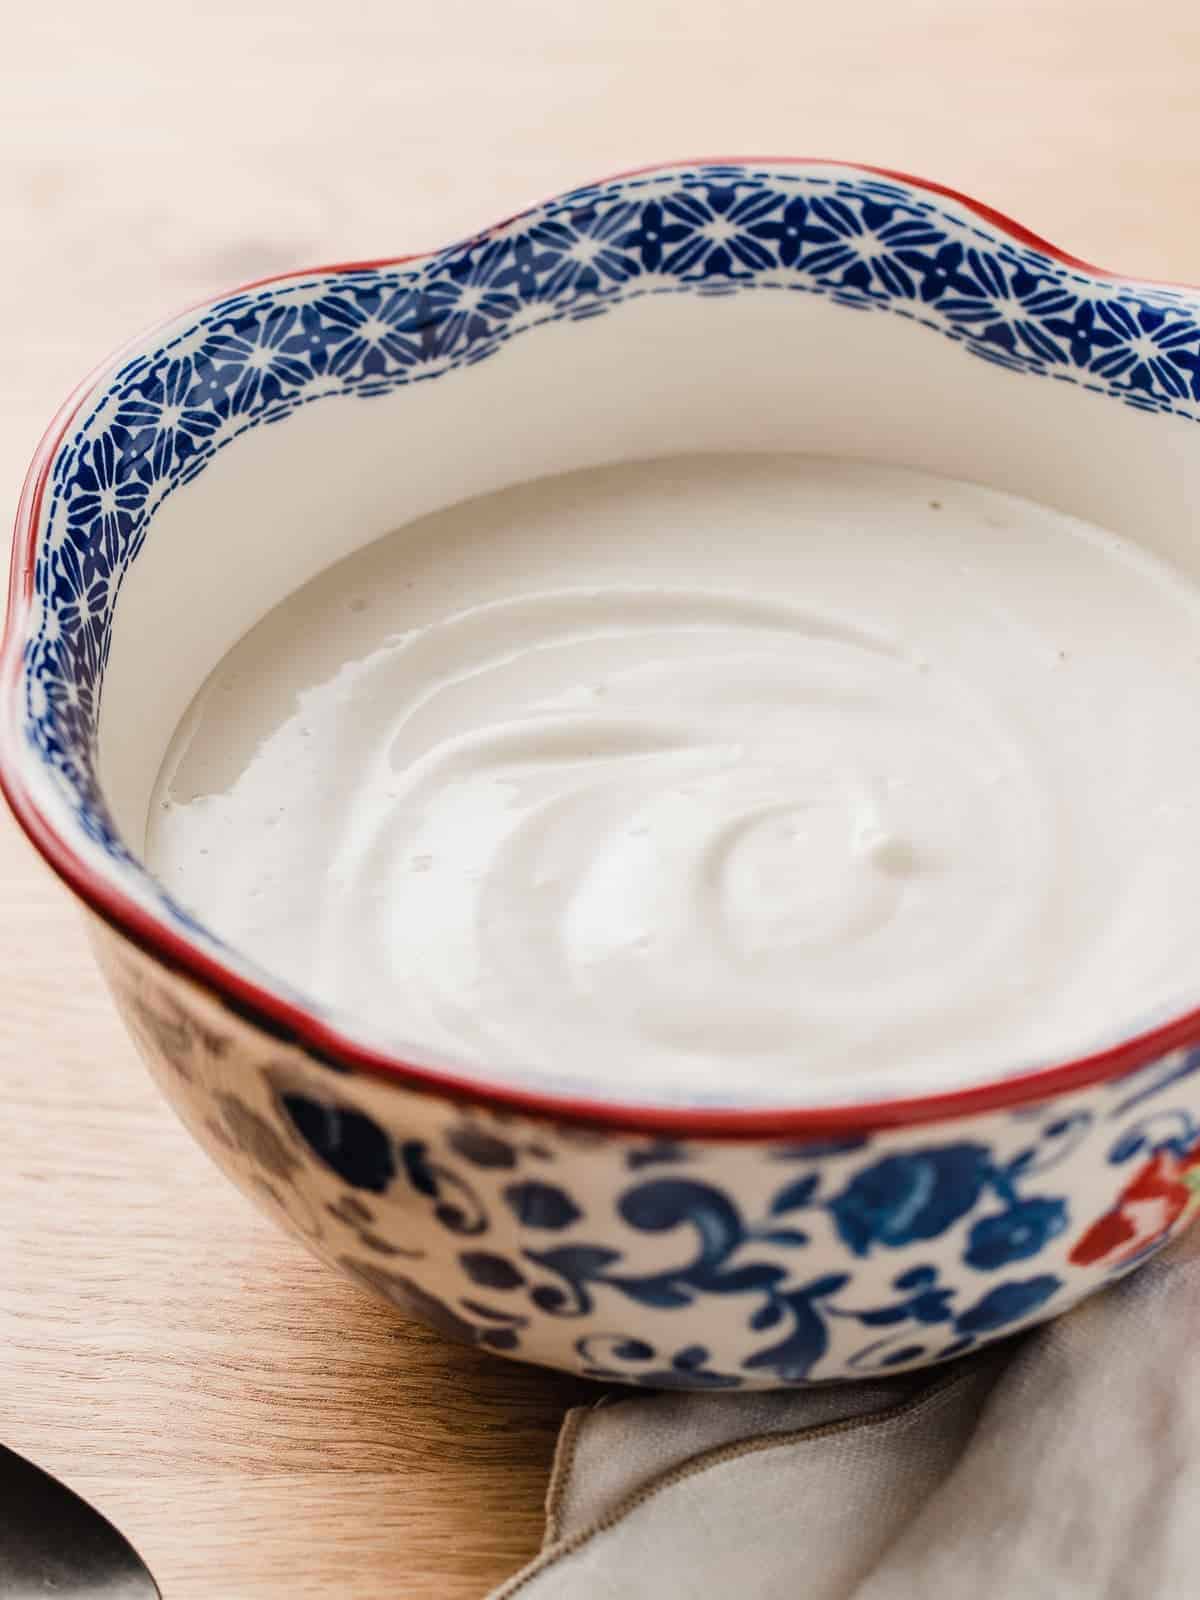 Cashew cream sauce in a bowl on a table.